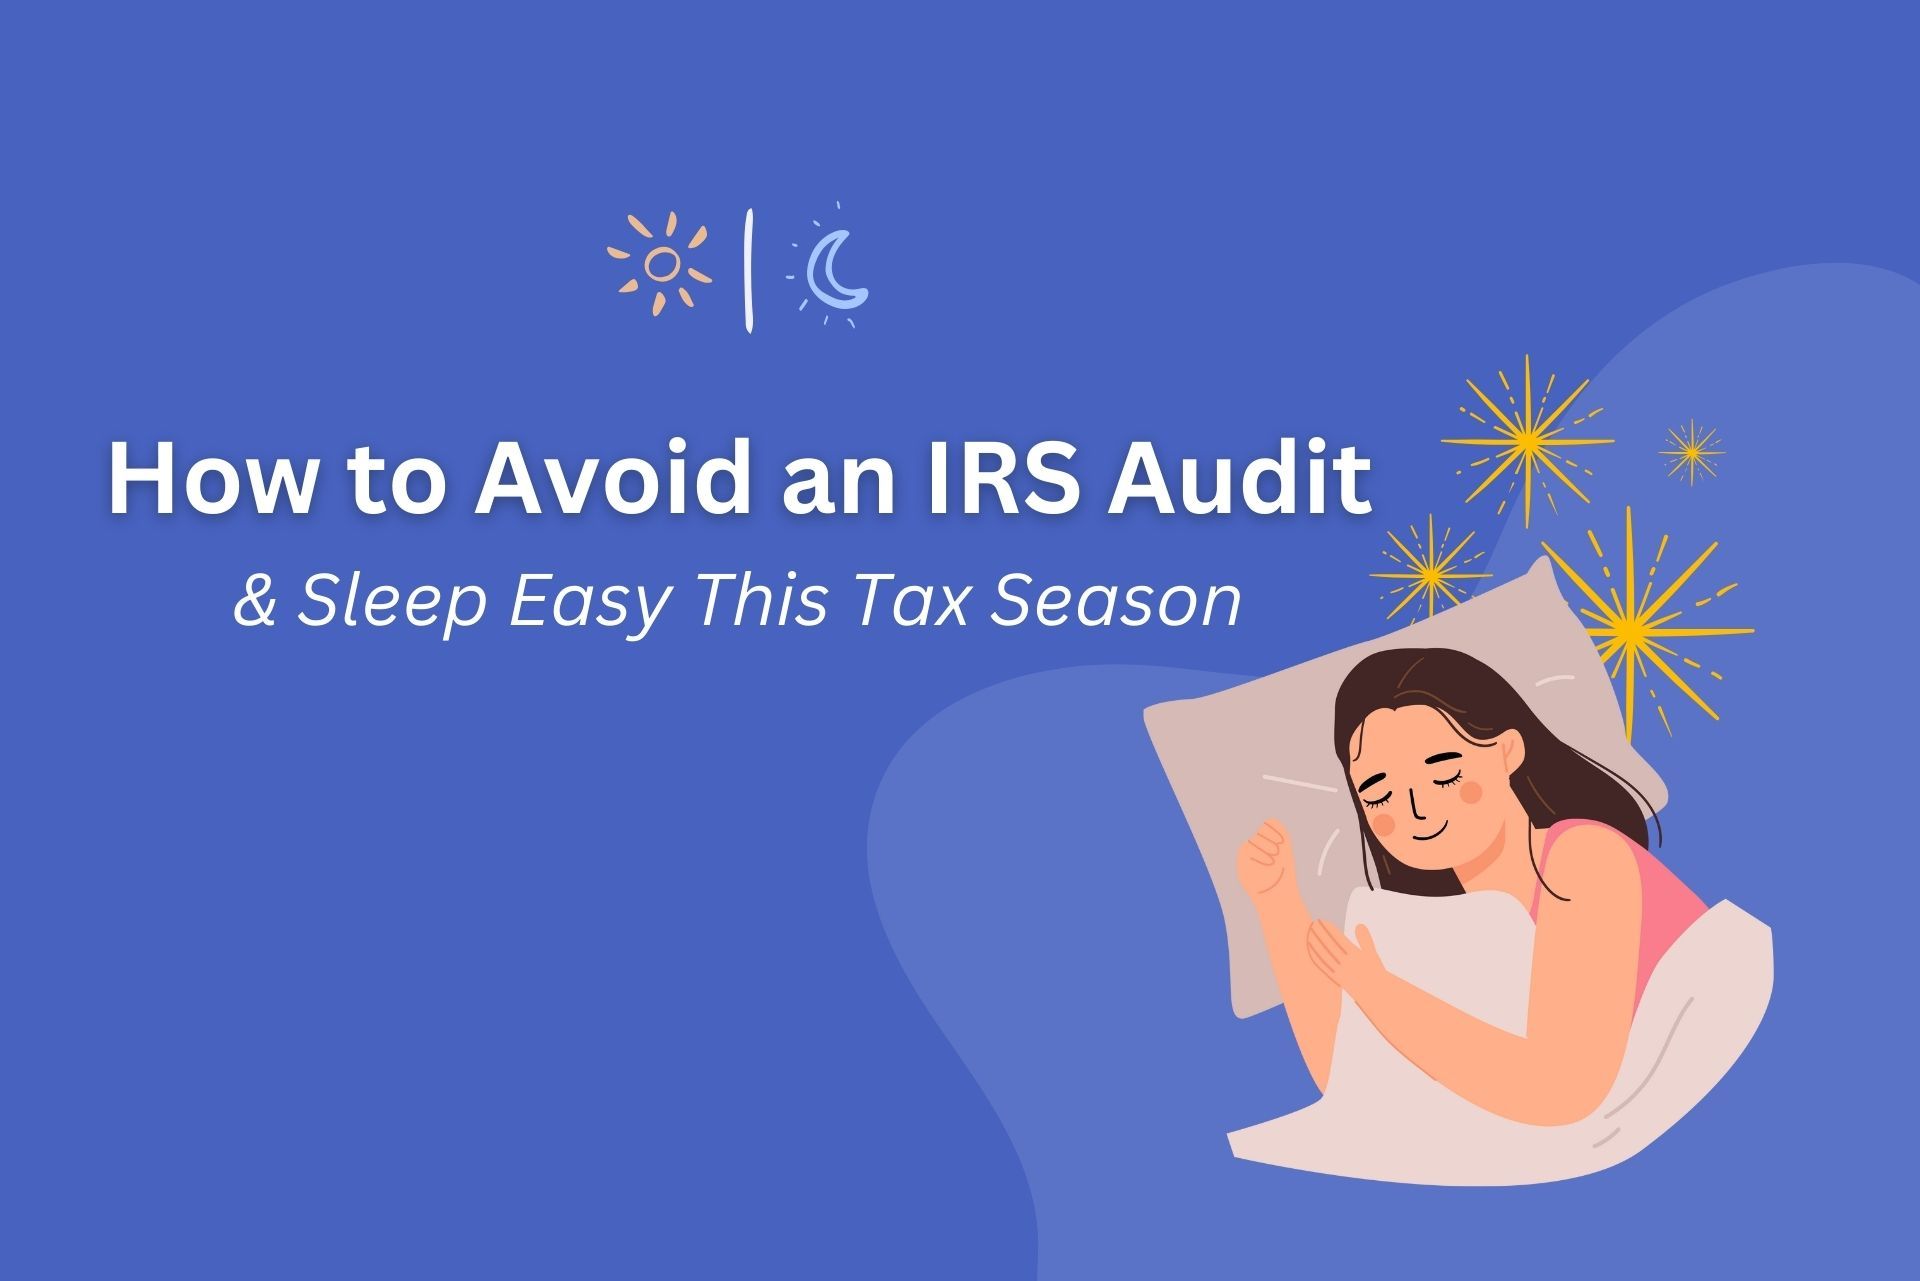 Avoid an IRS Audit - Here's How